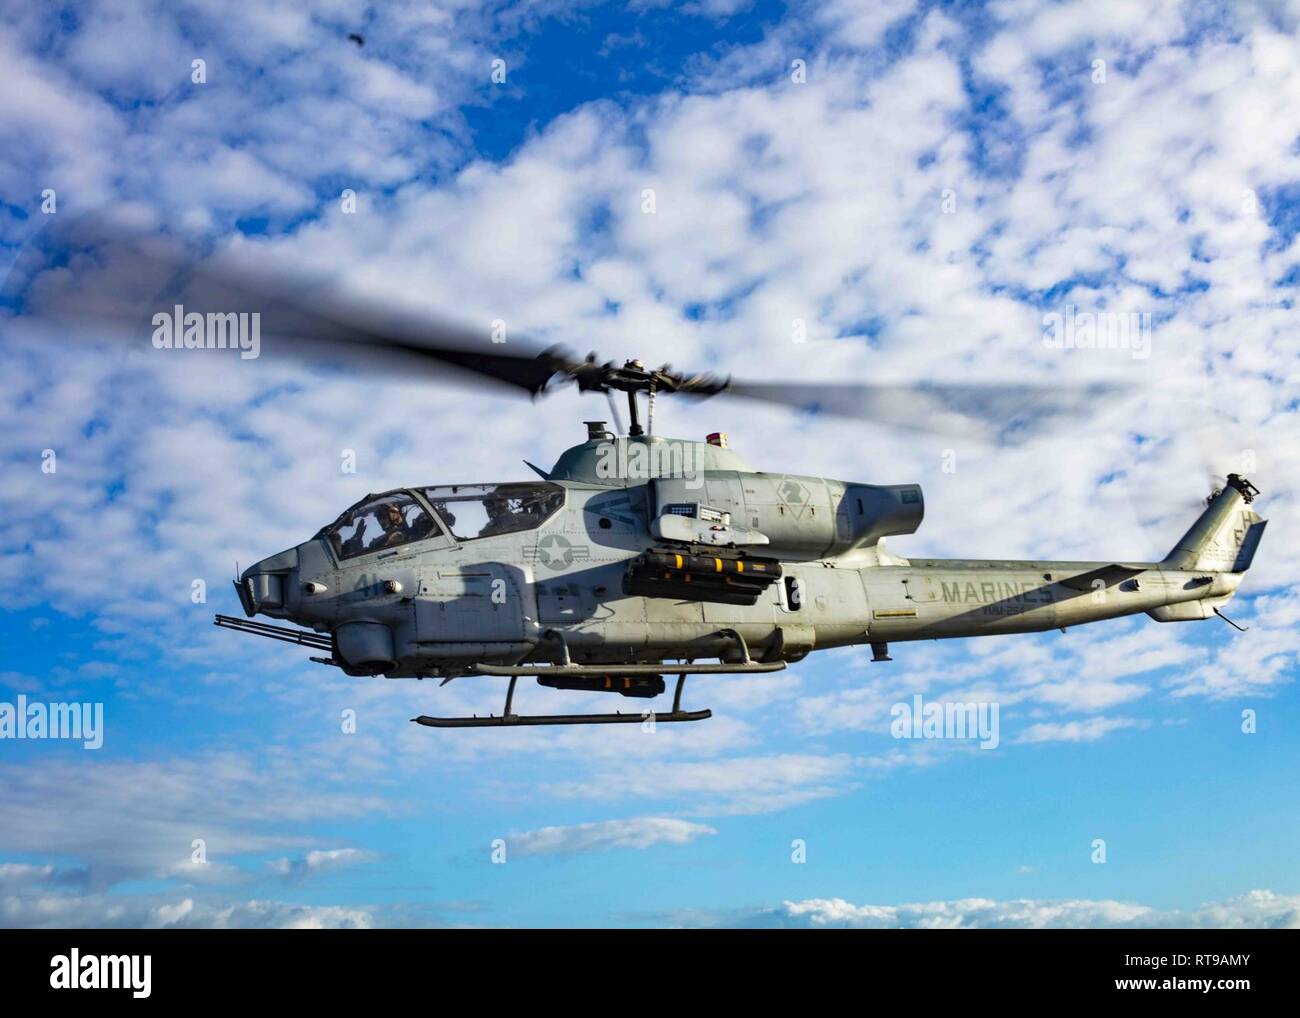 MEDITERRANEAN SEA (Jan. 30, 2019) An AH-1W Super Cobra helicopter assigned to the “Black Knights” of Marine Medium Tiltrotor Squadron (VMM) 264 (Reinforced) departs the flight deck of San Antonio-class amphibious transport dock ship USS Arlington (LPD 24), Jan. 30, 2019. Arlington is on a scheduled deployment as part of the Kearsarge Amphibious Ready Group in support of maritime security operations, crisis response and theater security cooperation, while also providing a forward naval presence. Stock Photo